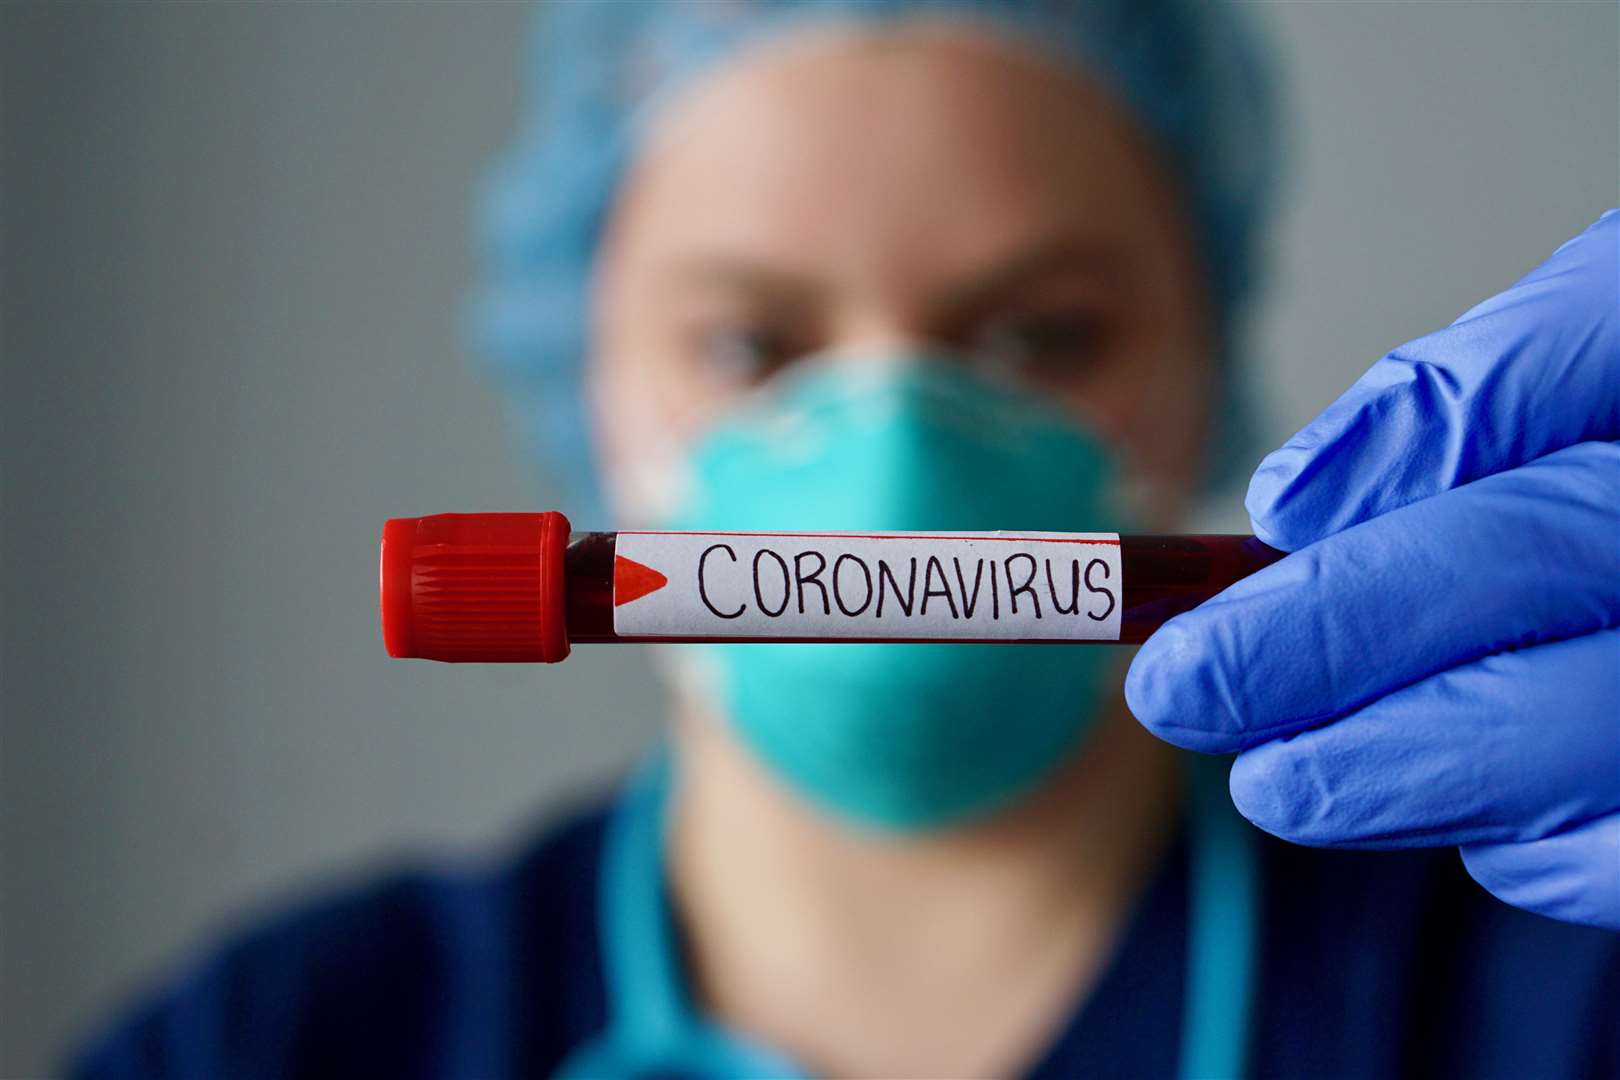 Volunteers are needed to help the NHS during the coronavirus pandemic